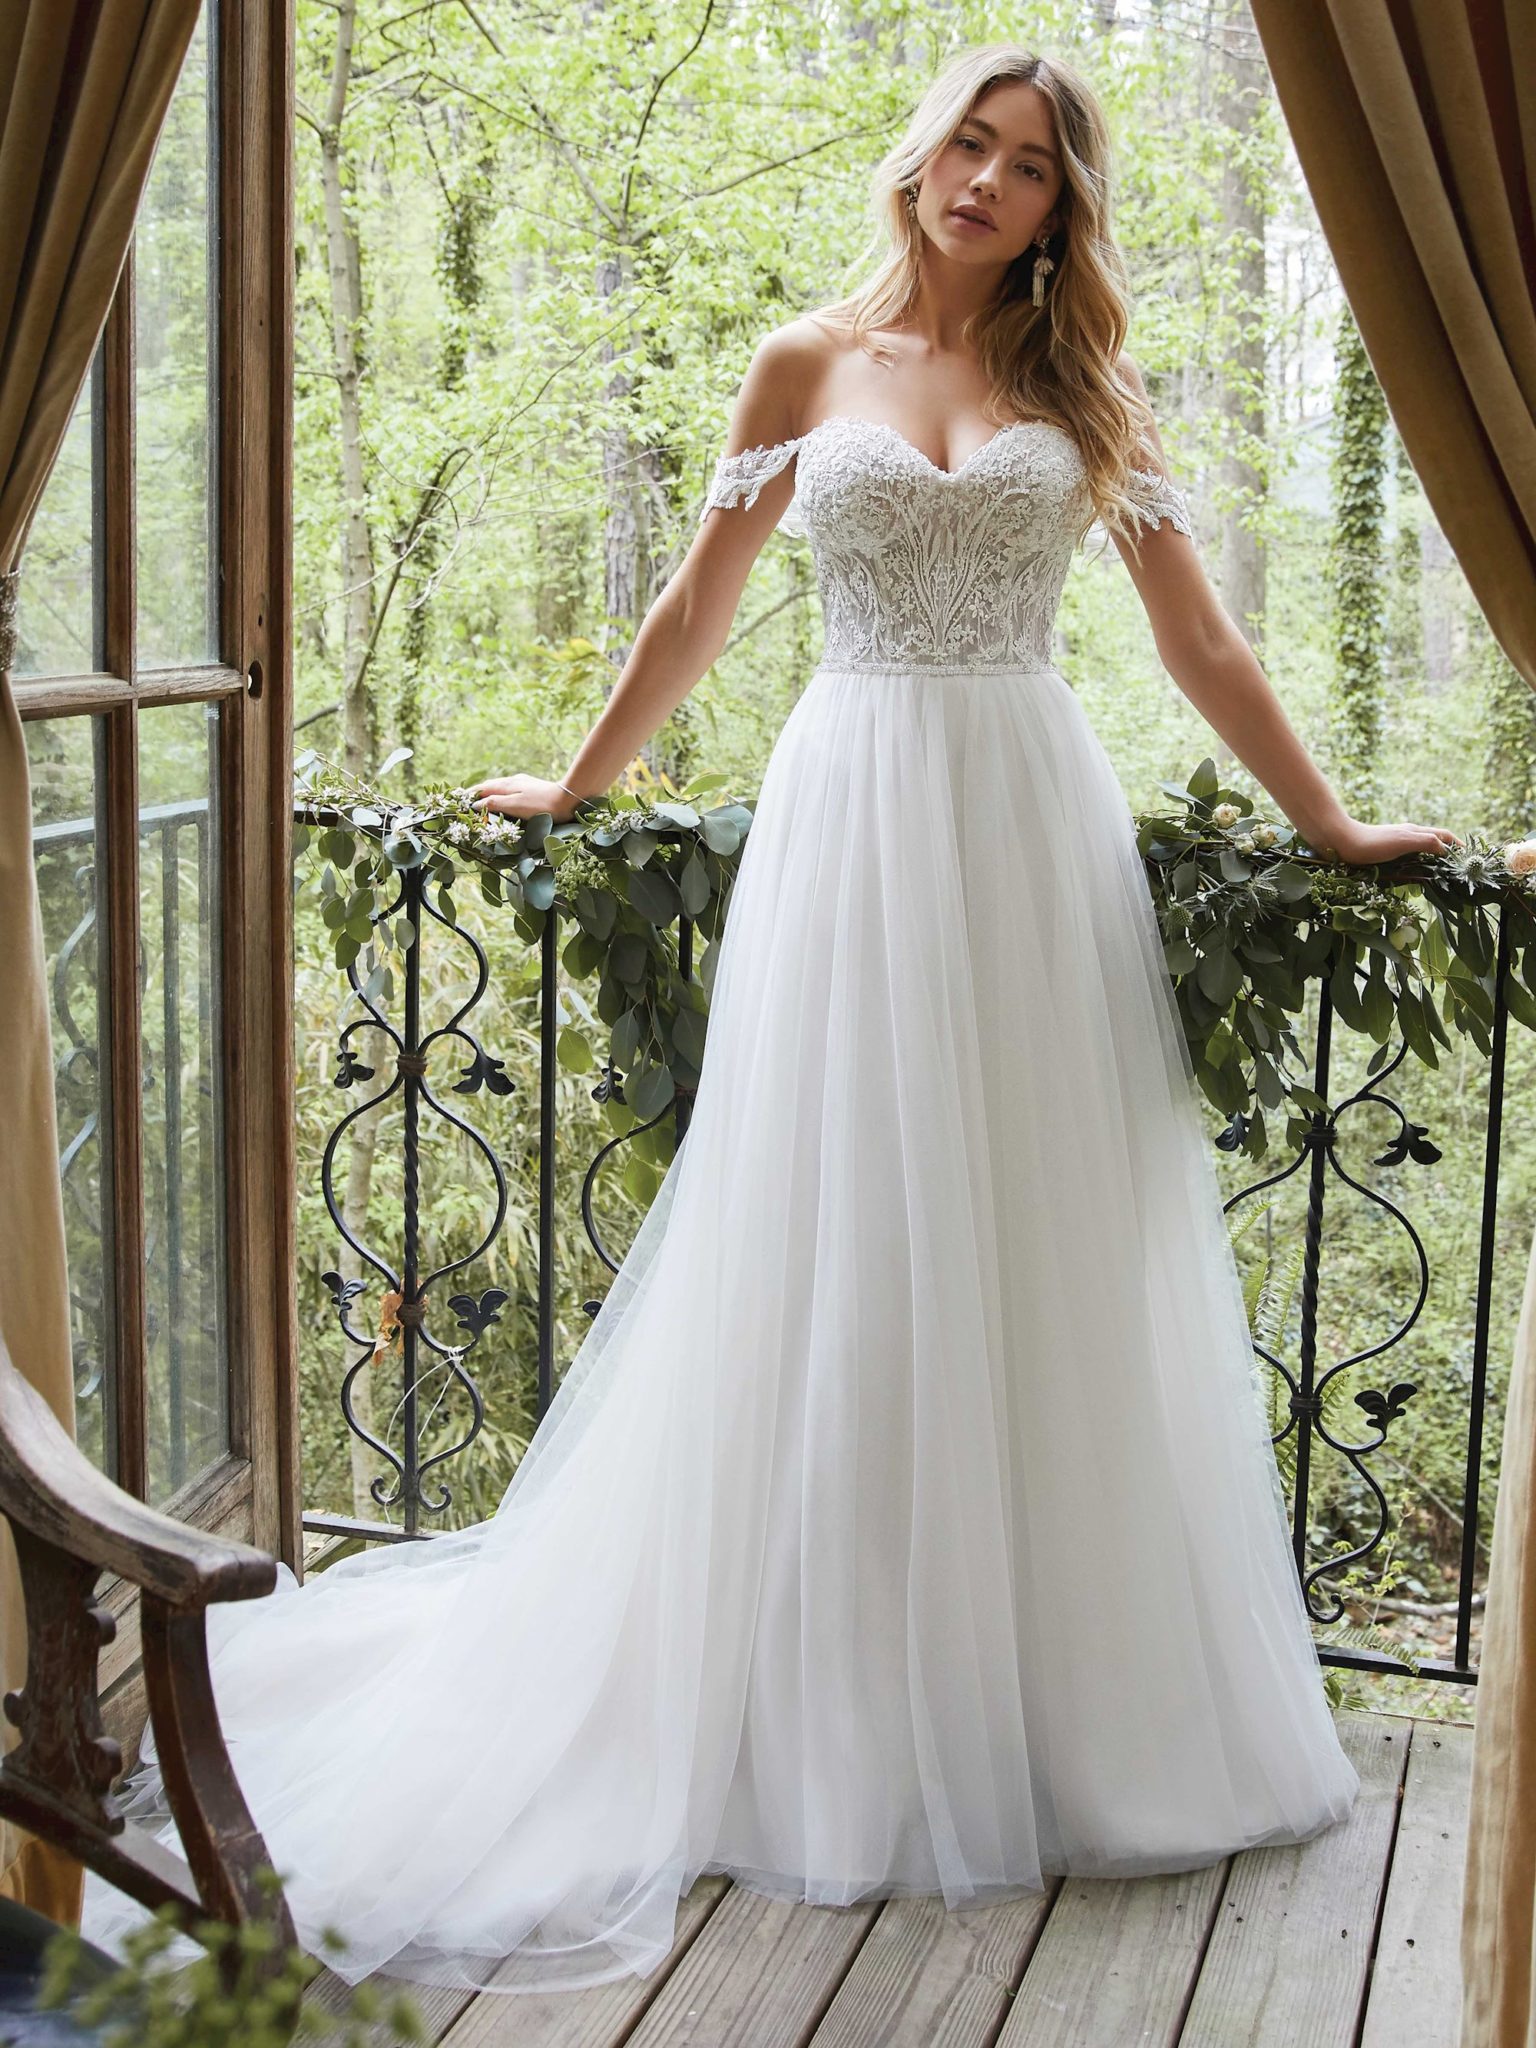 A woman wears Nia by Maggie Sottero